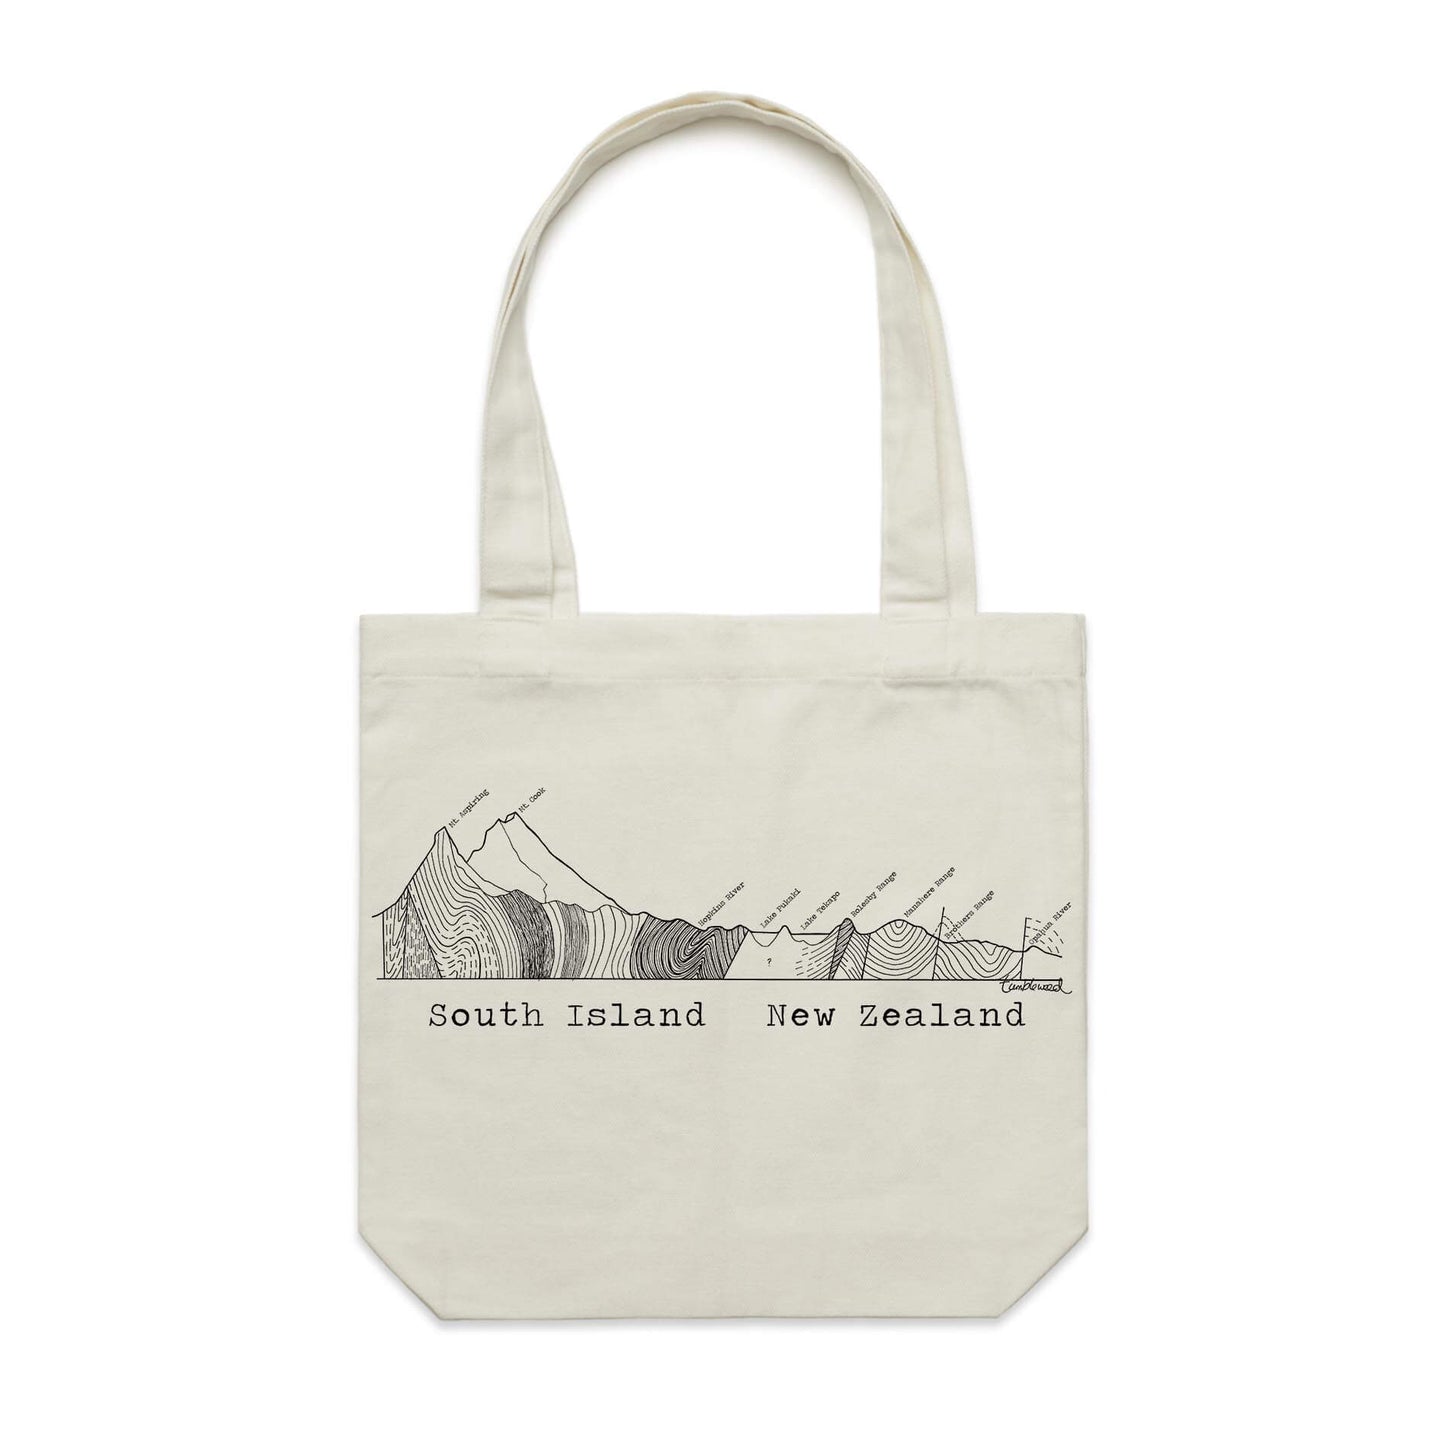 Cotton canvas tote bag with a screen printed South Island Cross Section design.